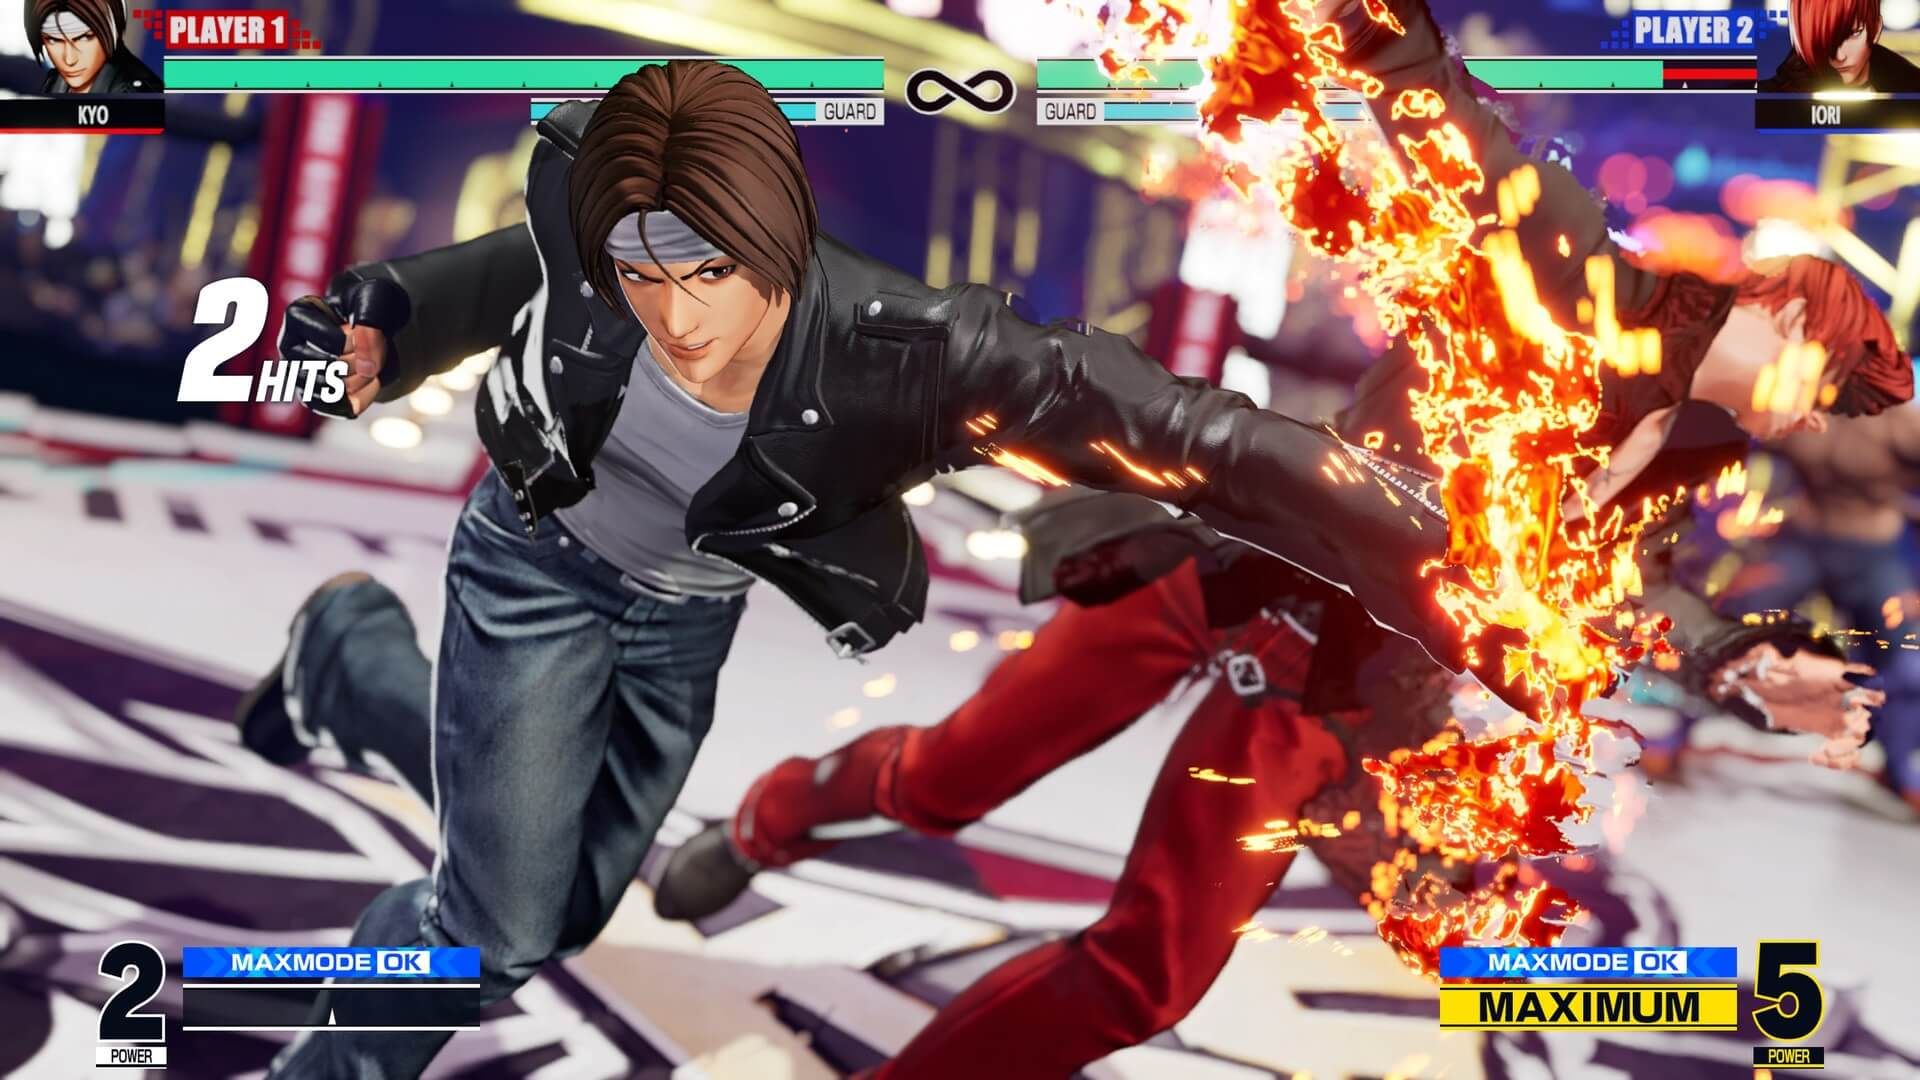 SNK Developers Share Insight About King of Fighters XV